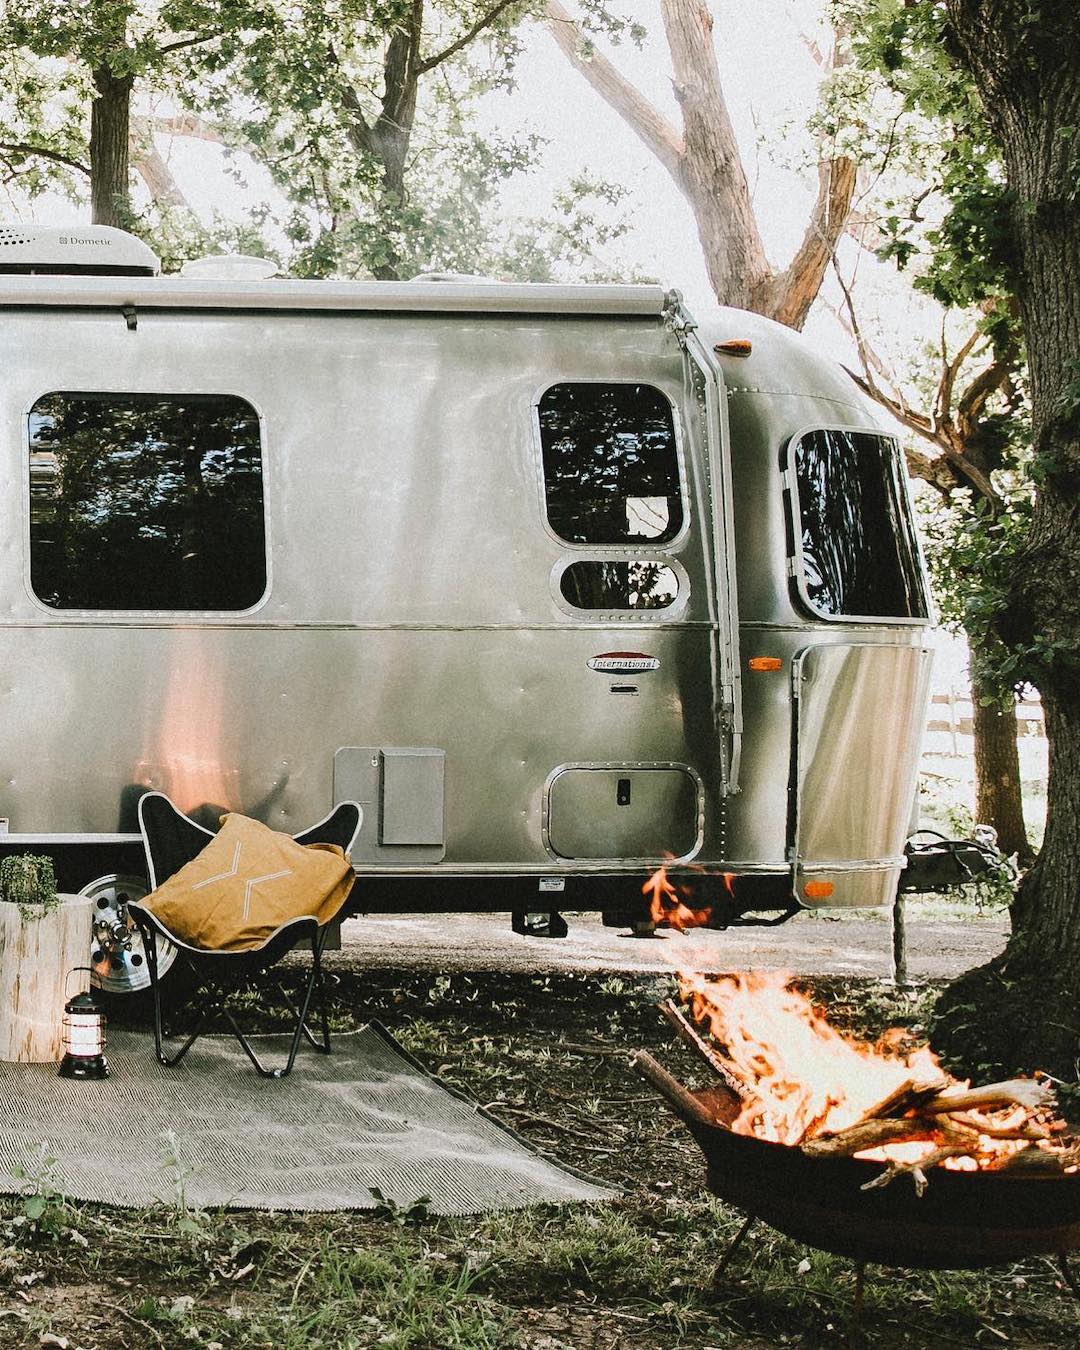 An Airstream is parked under a tree with a campfire burning outside.